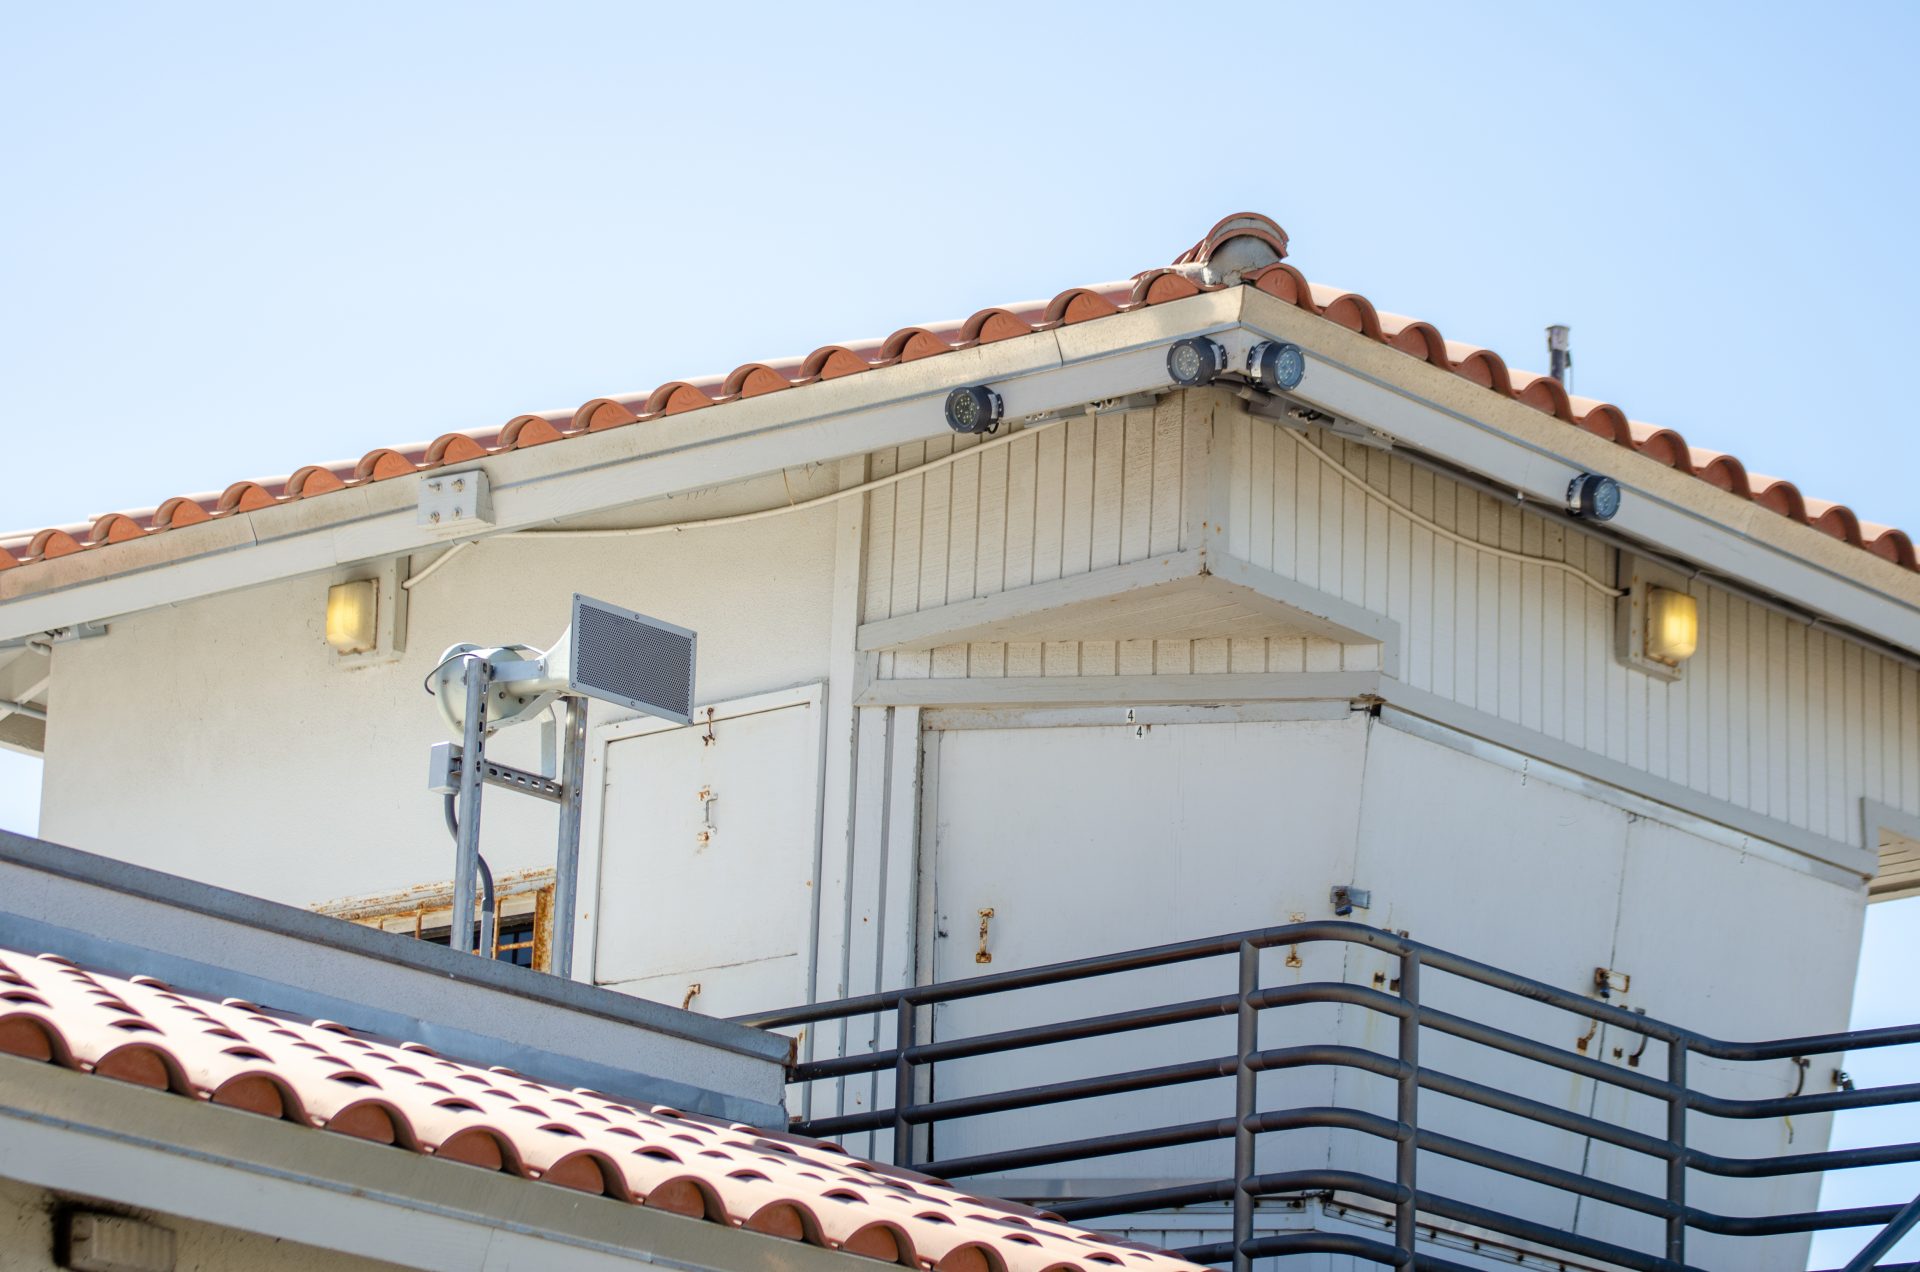 Beach Emergency Evacuation Lights System installed on Torrance lifeguard building